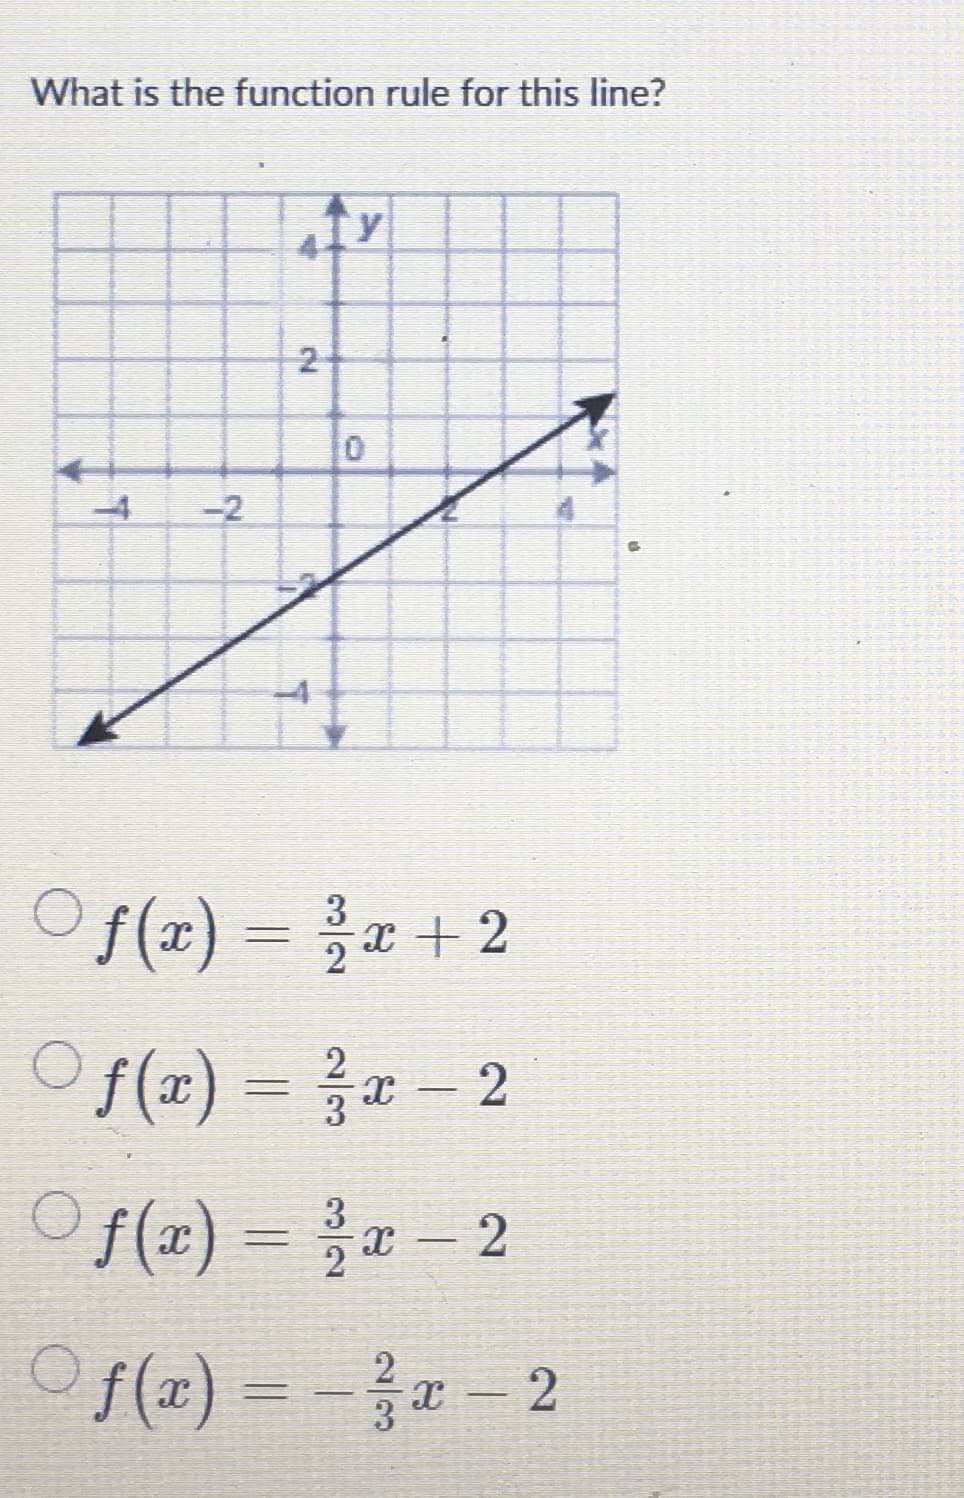 What is the function rule for this line?
1
-2
Ty
2
f(x) = 2/x + 2
f(x) = x - 2
f(x) = 2/x - 2
f(x)=²x-2
C